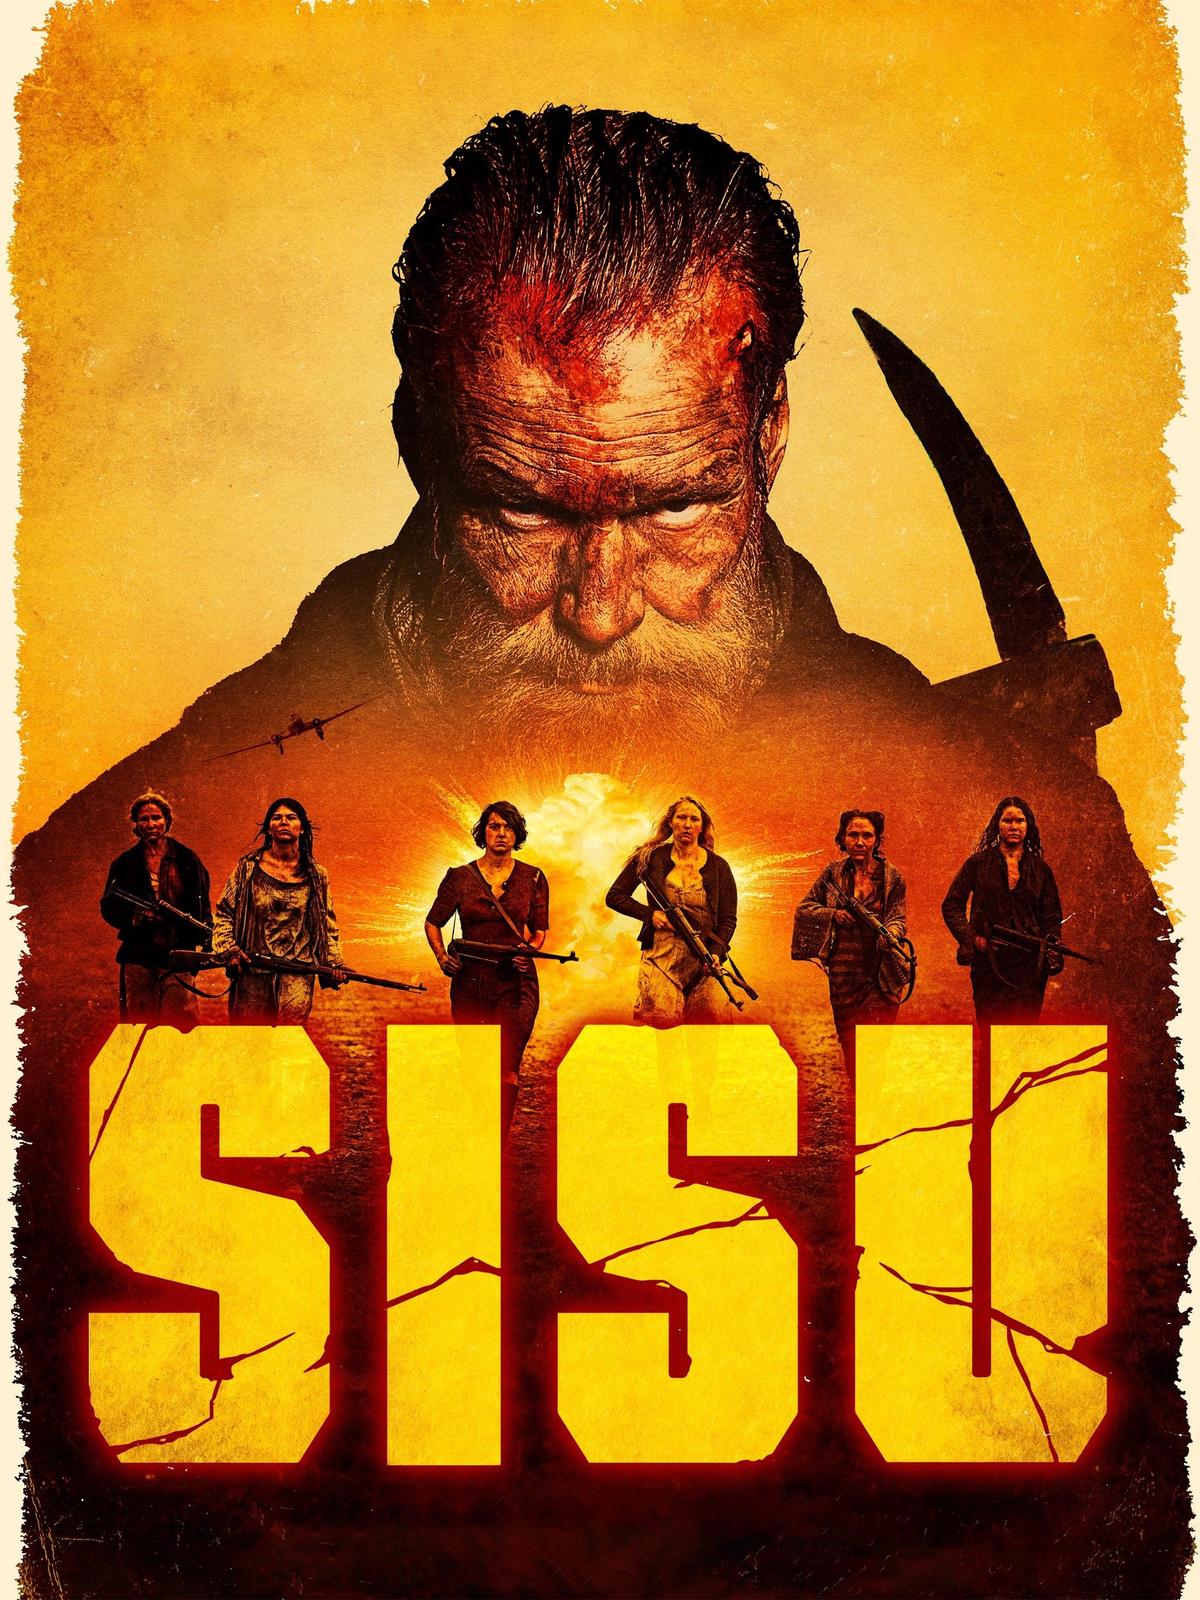 Movie poster for "Sisu." Note that the lettering style and female tableau  are a tribute to the Quentin Tarantino poster below.